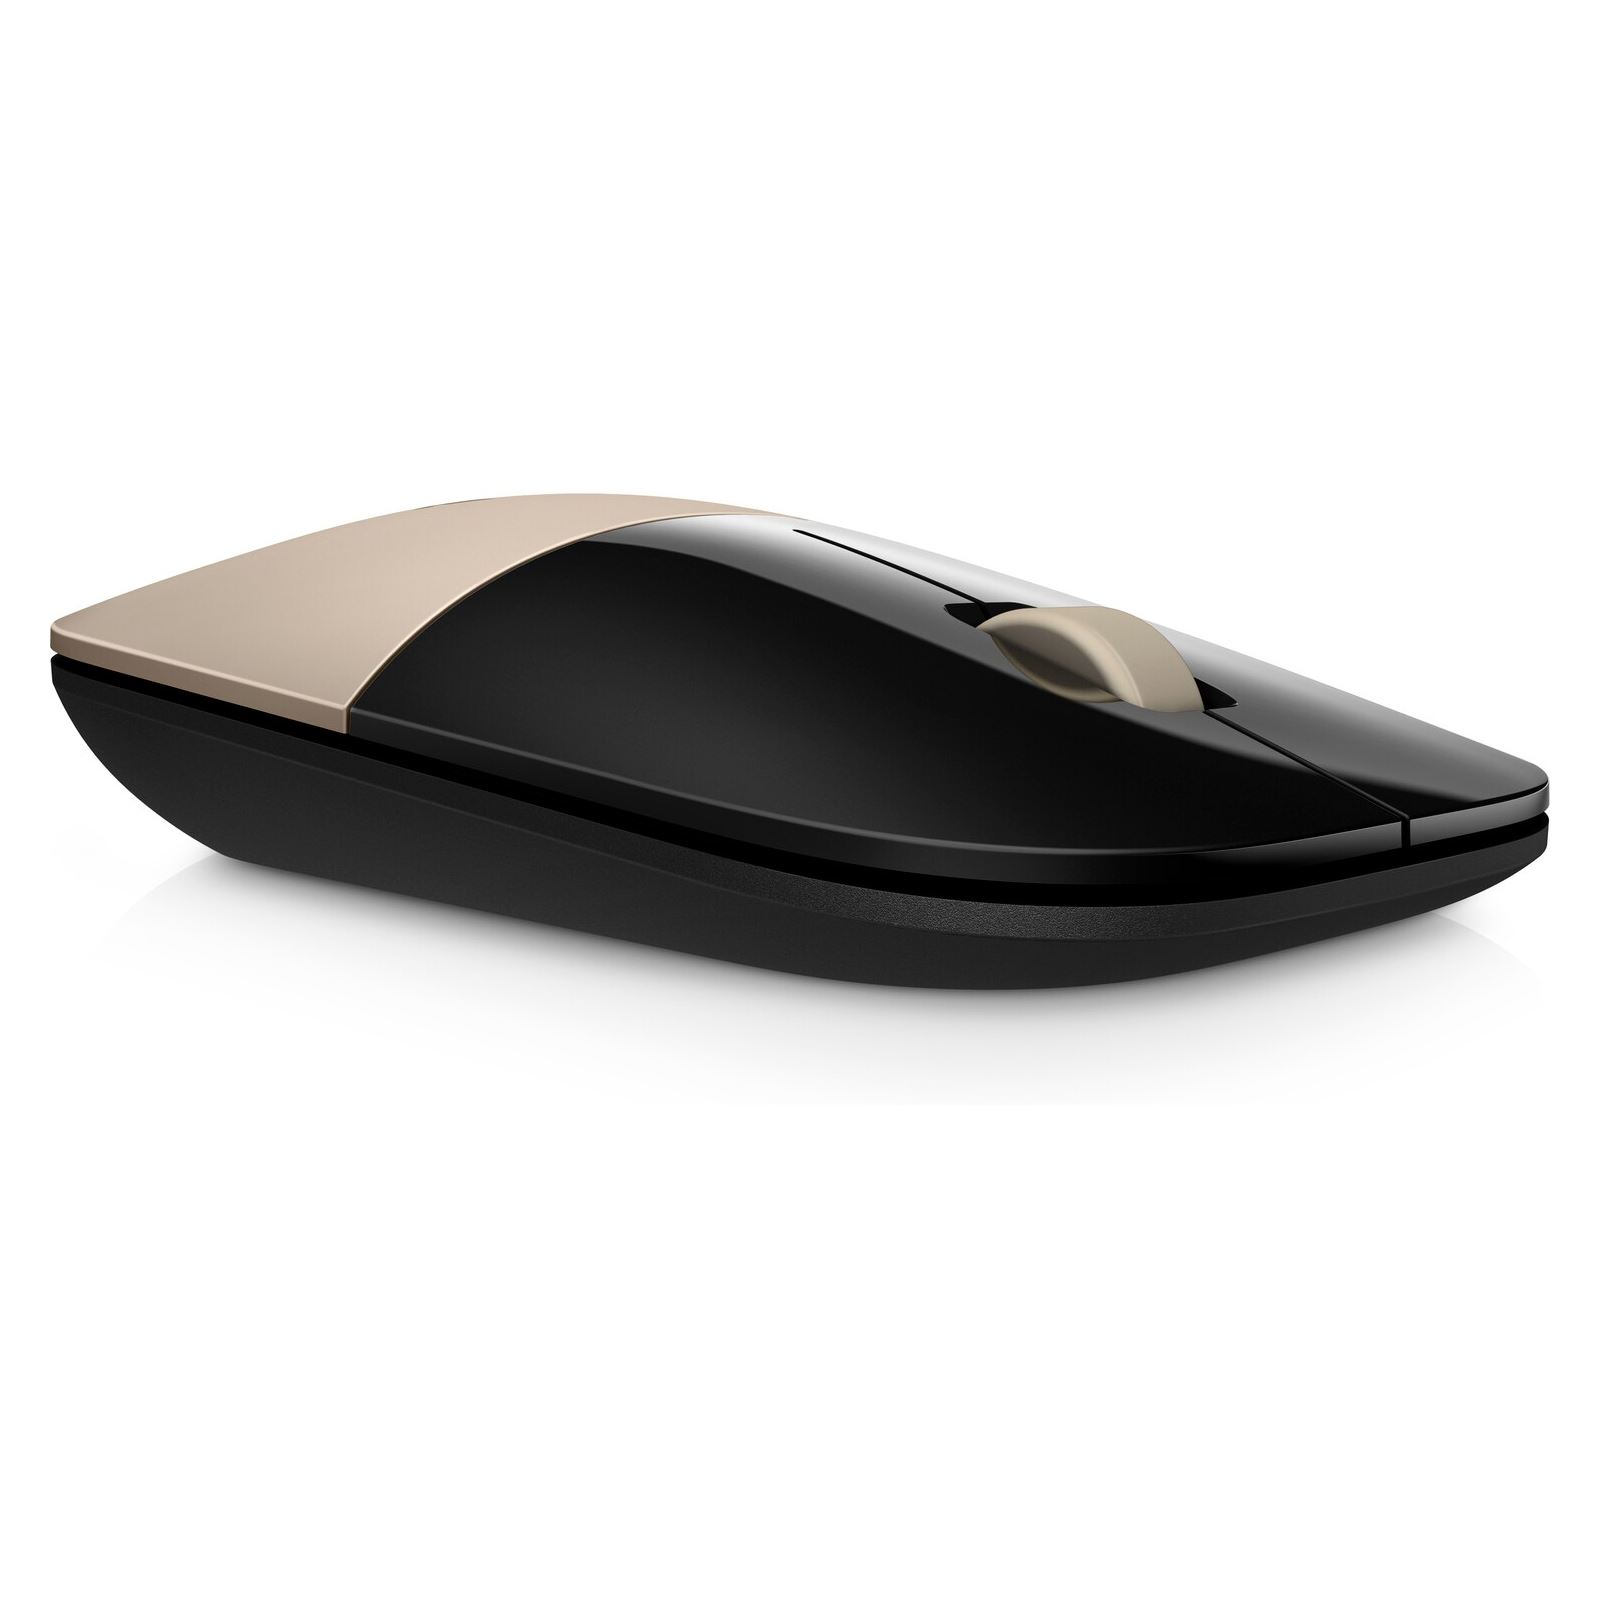 HP-Mouse-X3700-Gold-2